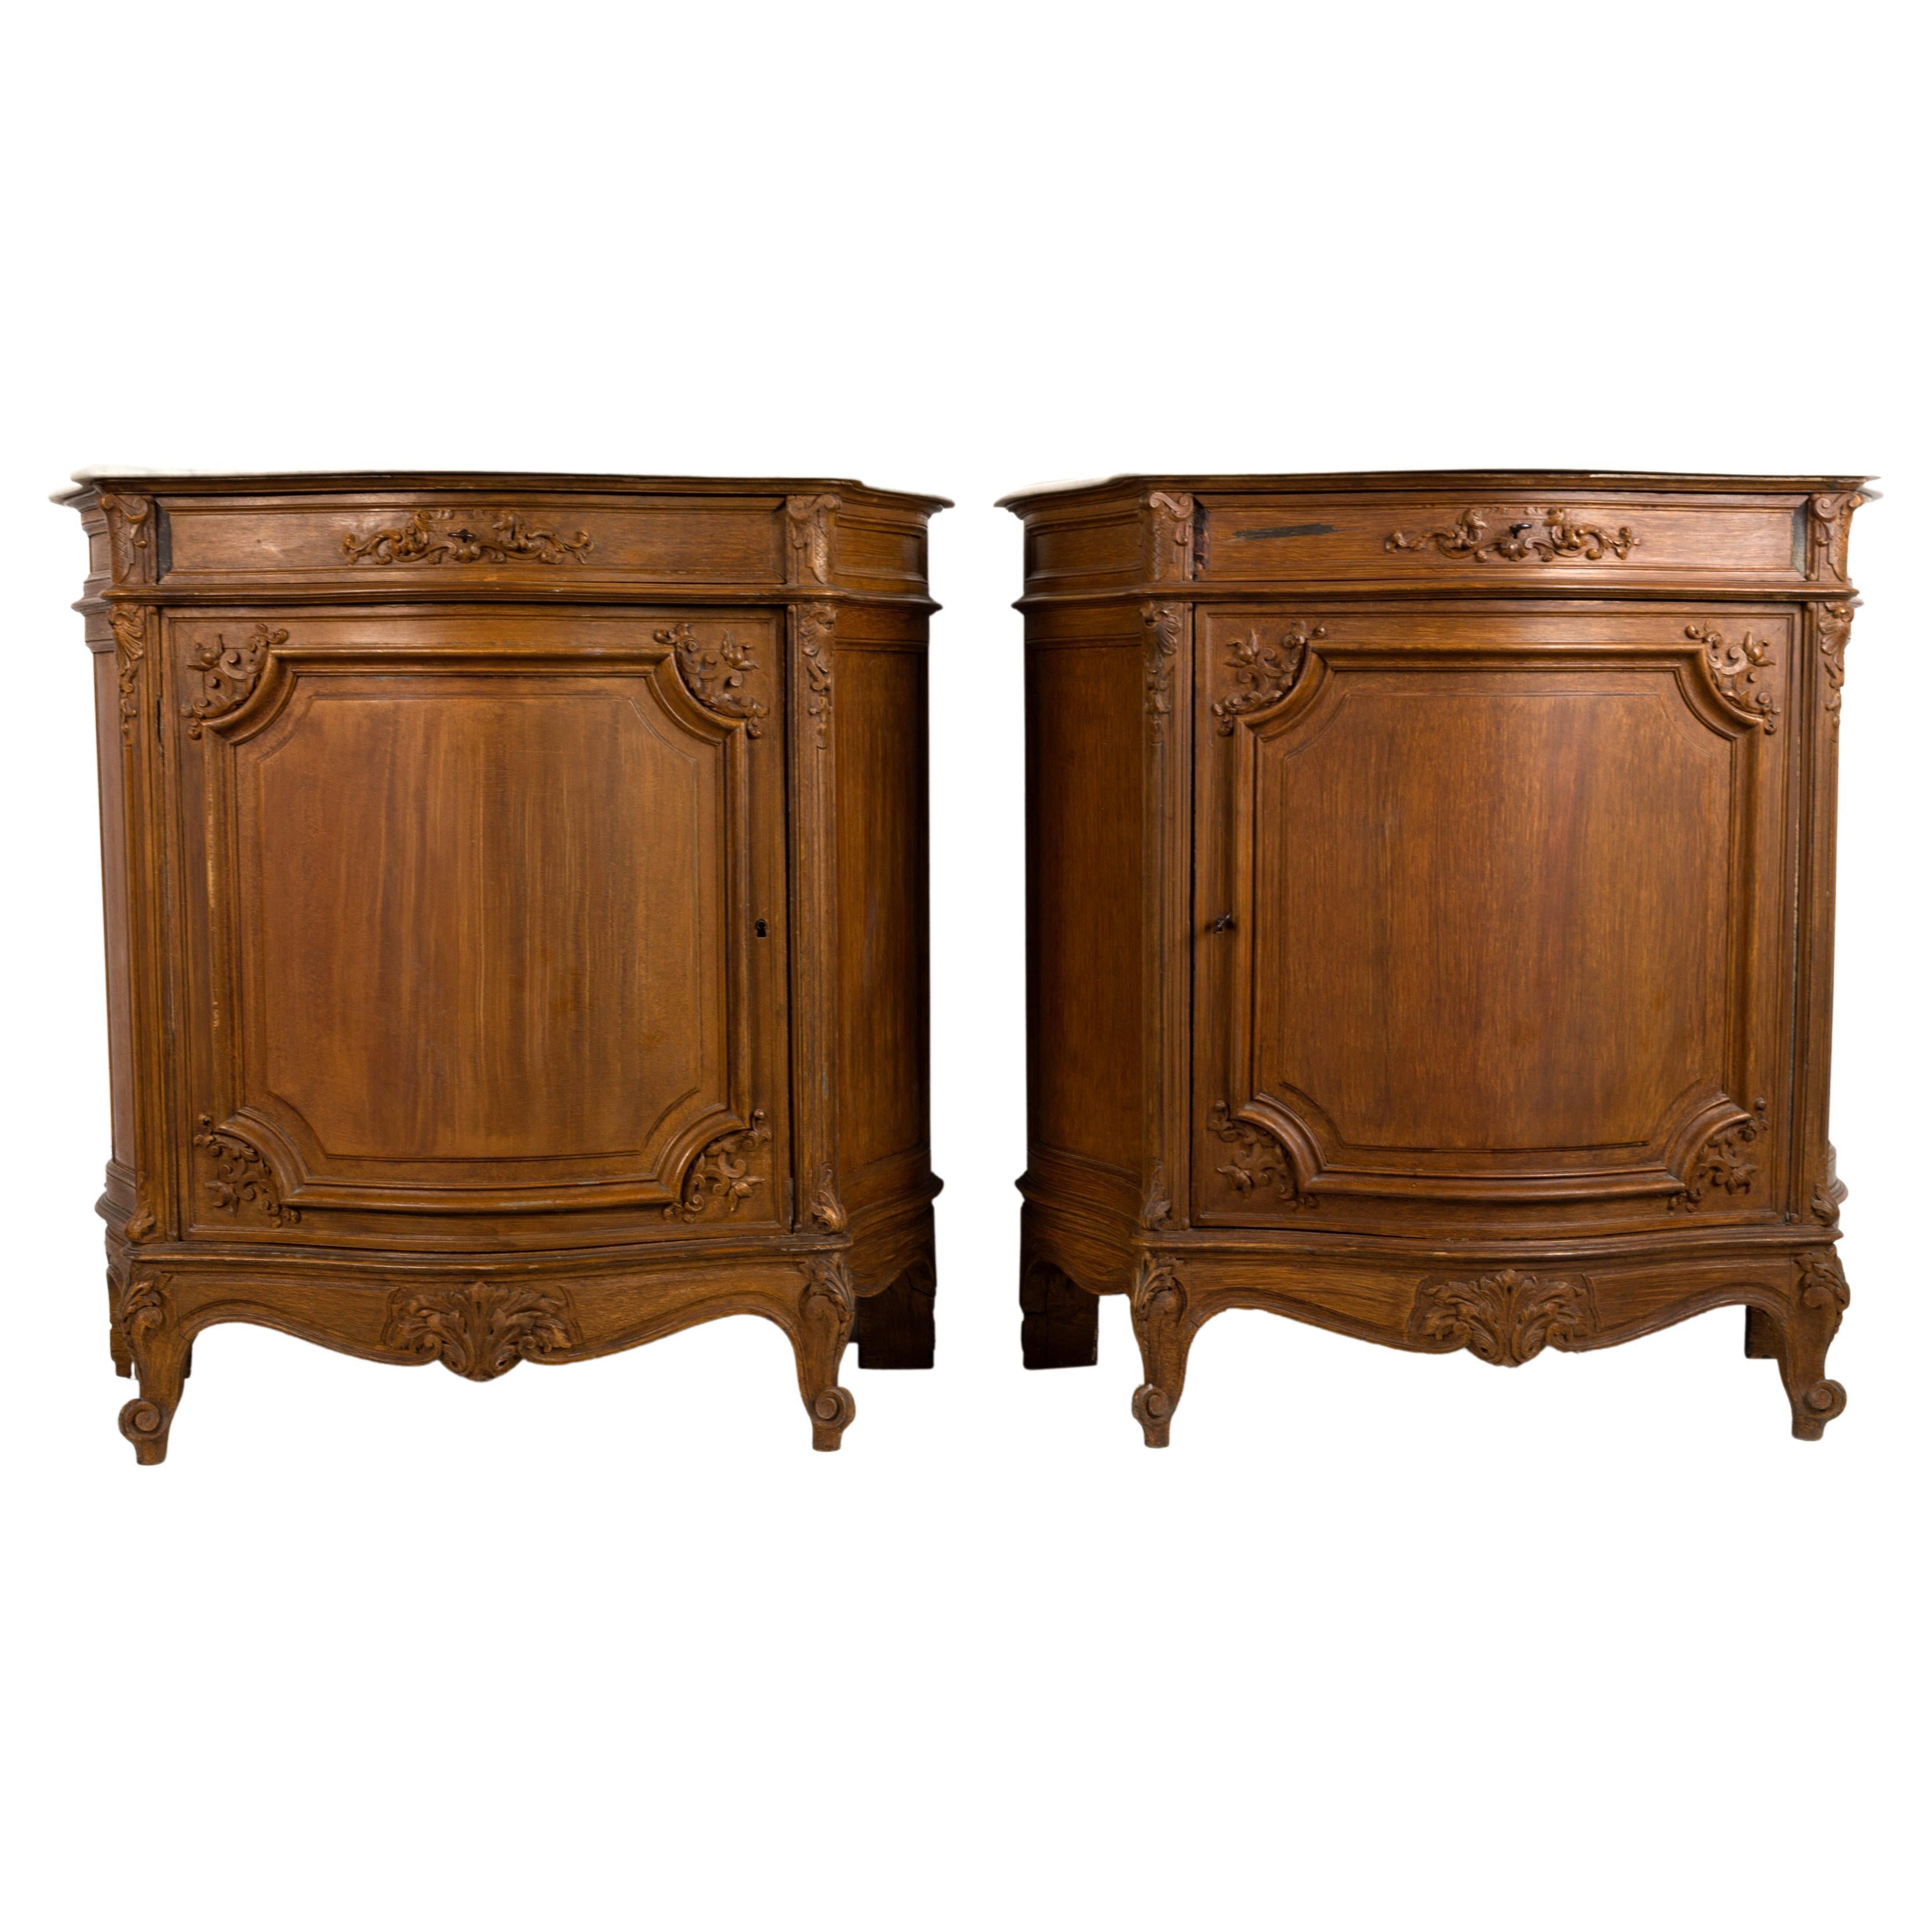 A pair of 19th century French serpentine commodes in the Louis XV manner.
Each with a marble top above a frieze of one short drawer above a central door, the surfaces with scrub painted panelling and carved detailing, all terminating in escargot